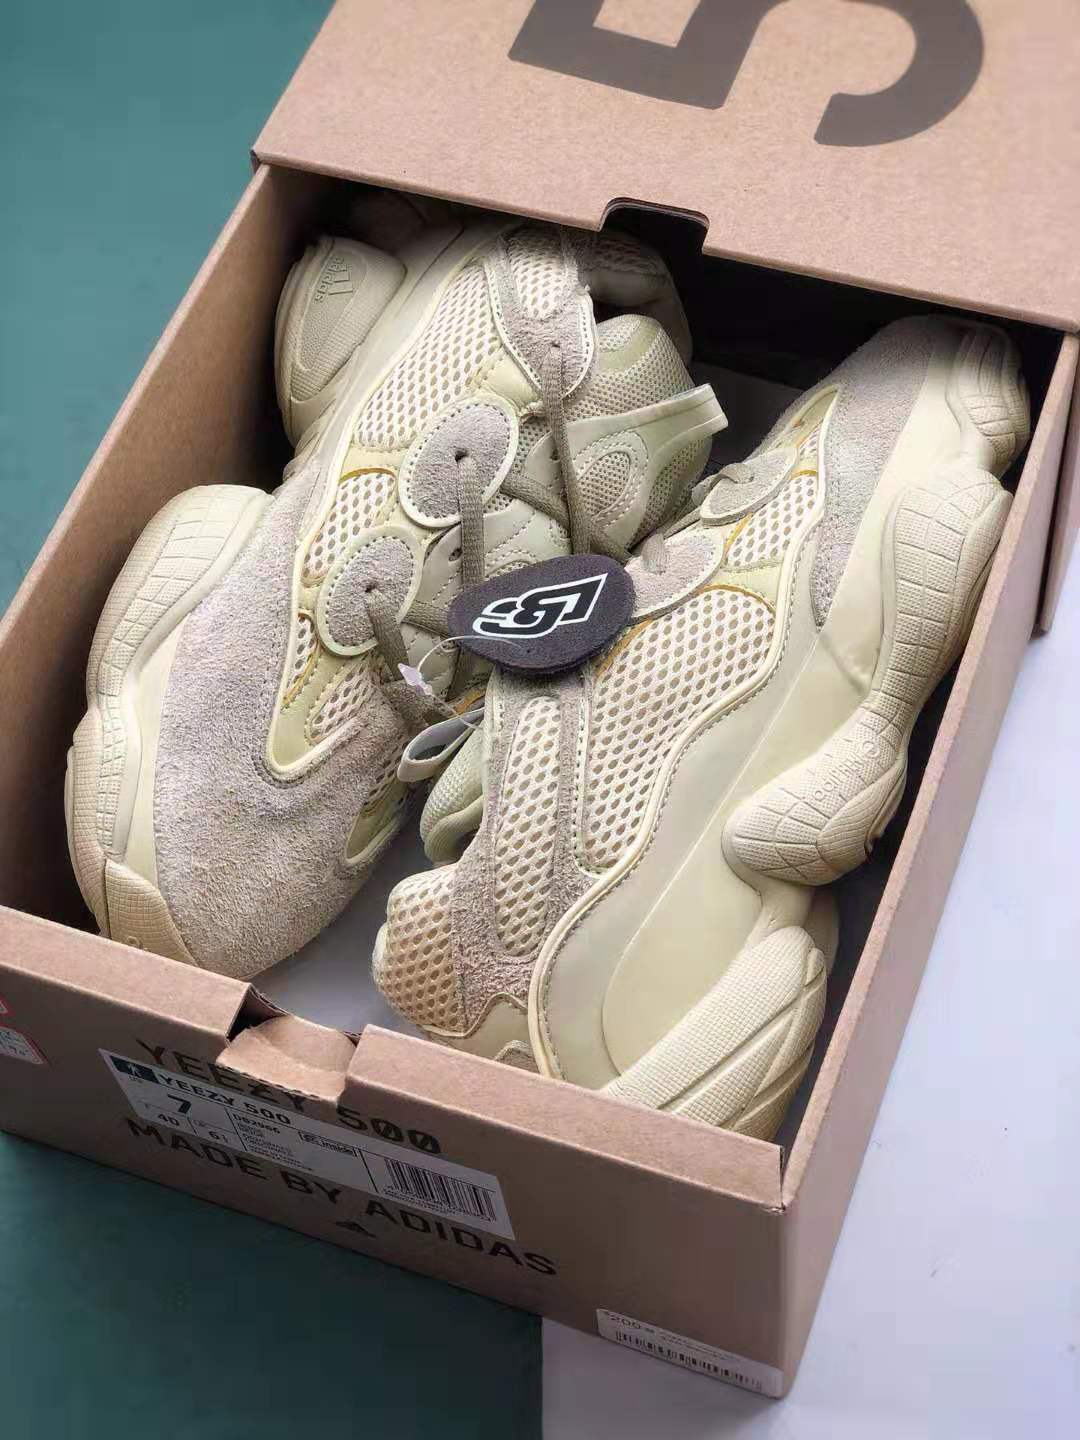 Adidas Yeezy 500 Super Moon Yellow DB2966 - Limited Edition Release